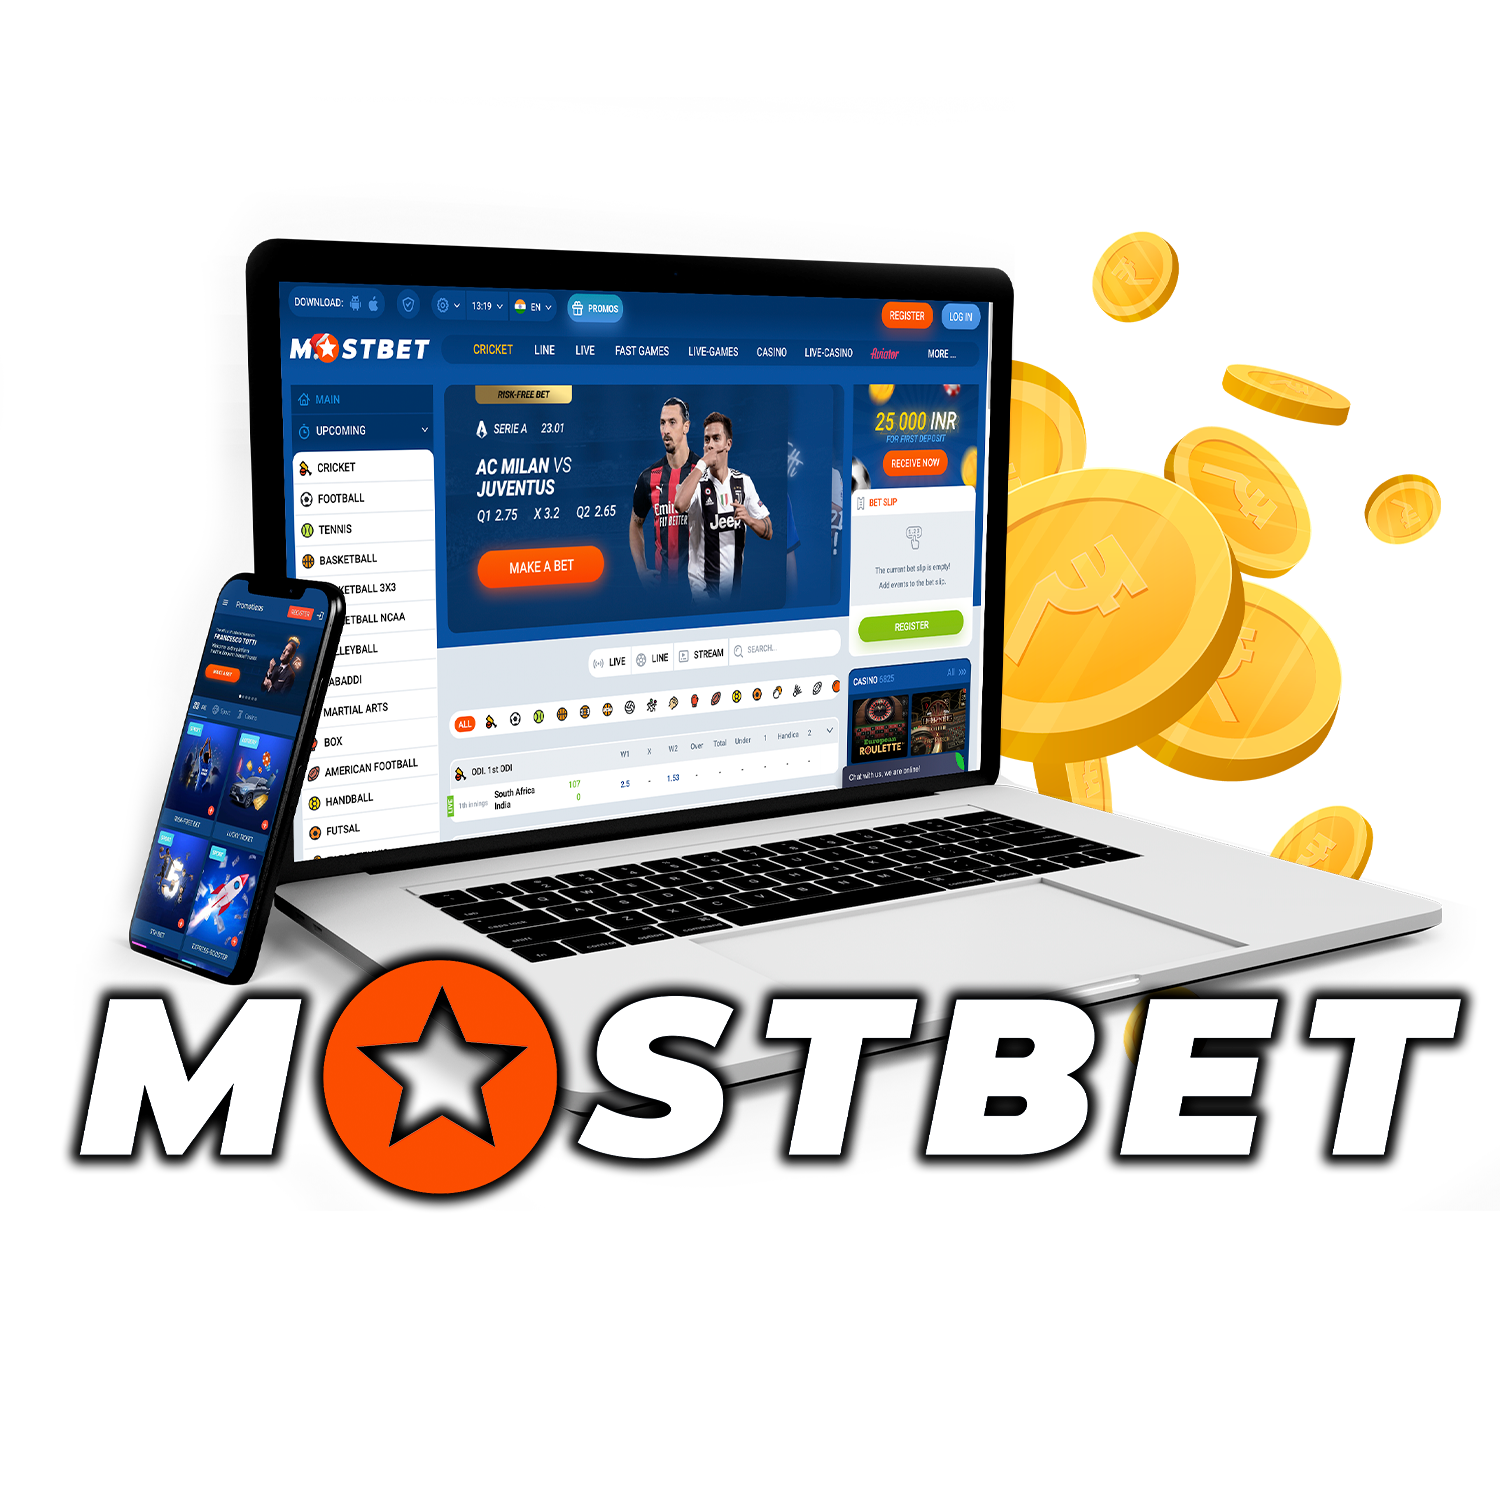 What Can You Do To Save Your Mostbet is the best bookmaker in Bangladesh From Destruction By Social Media?